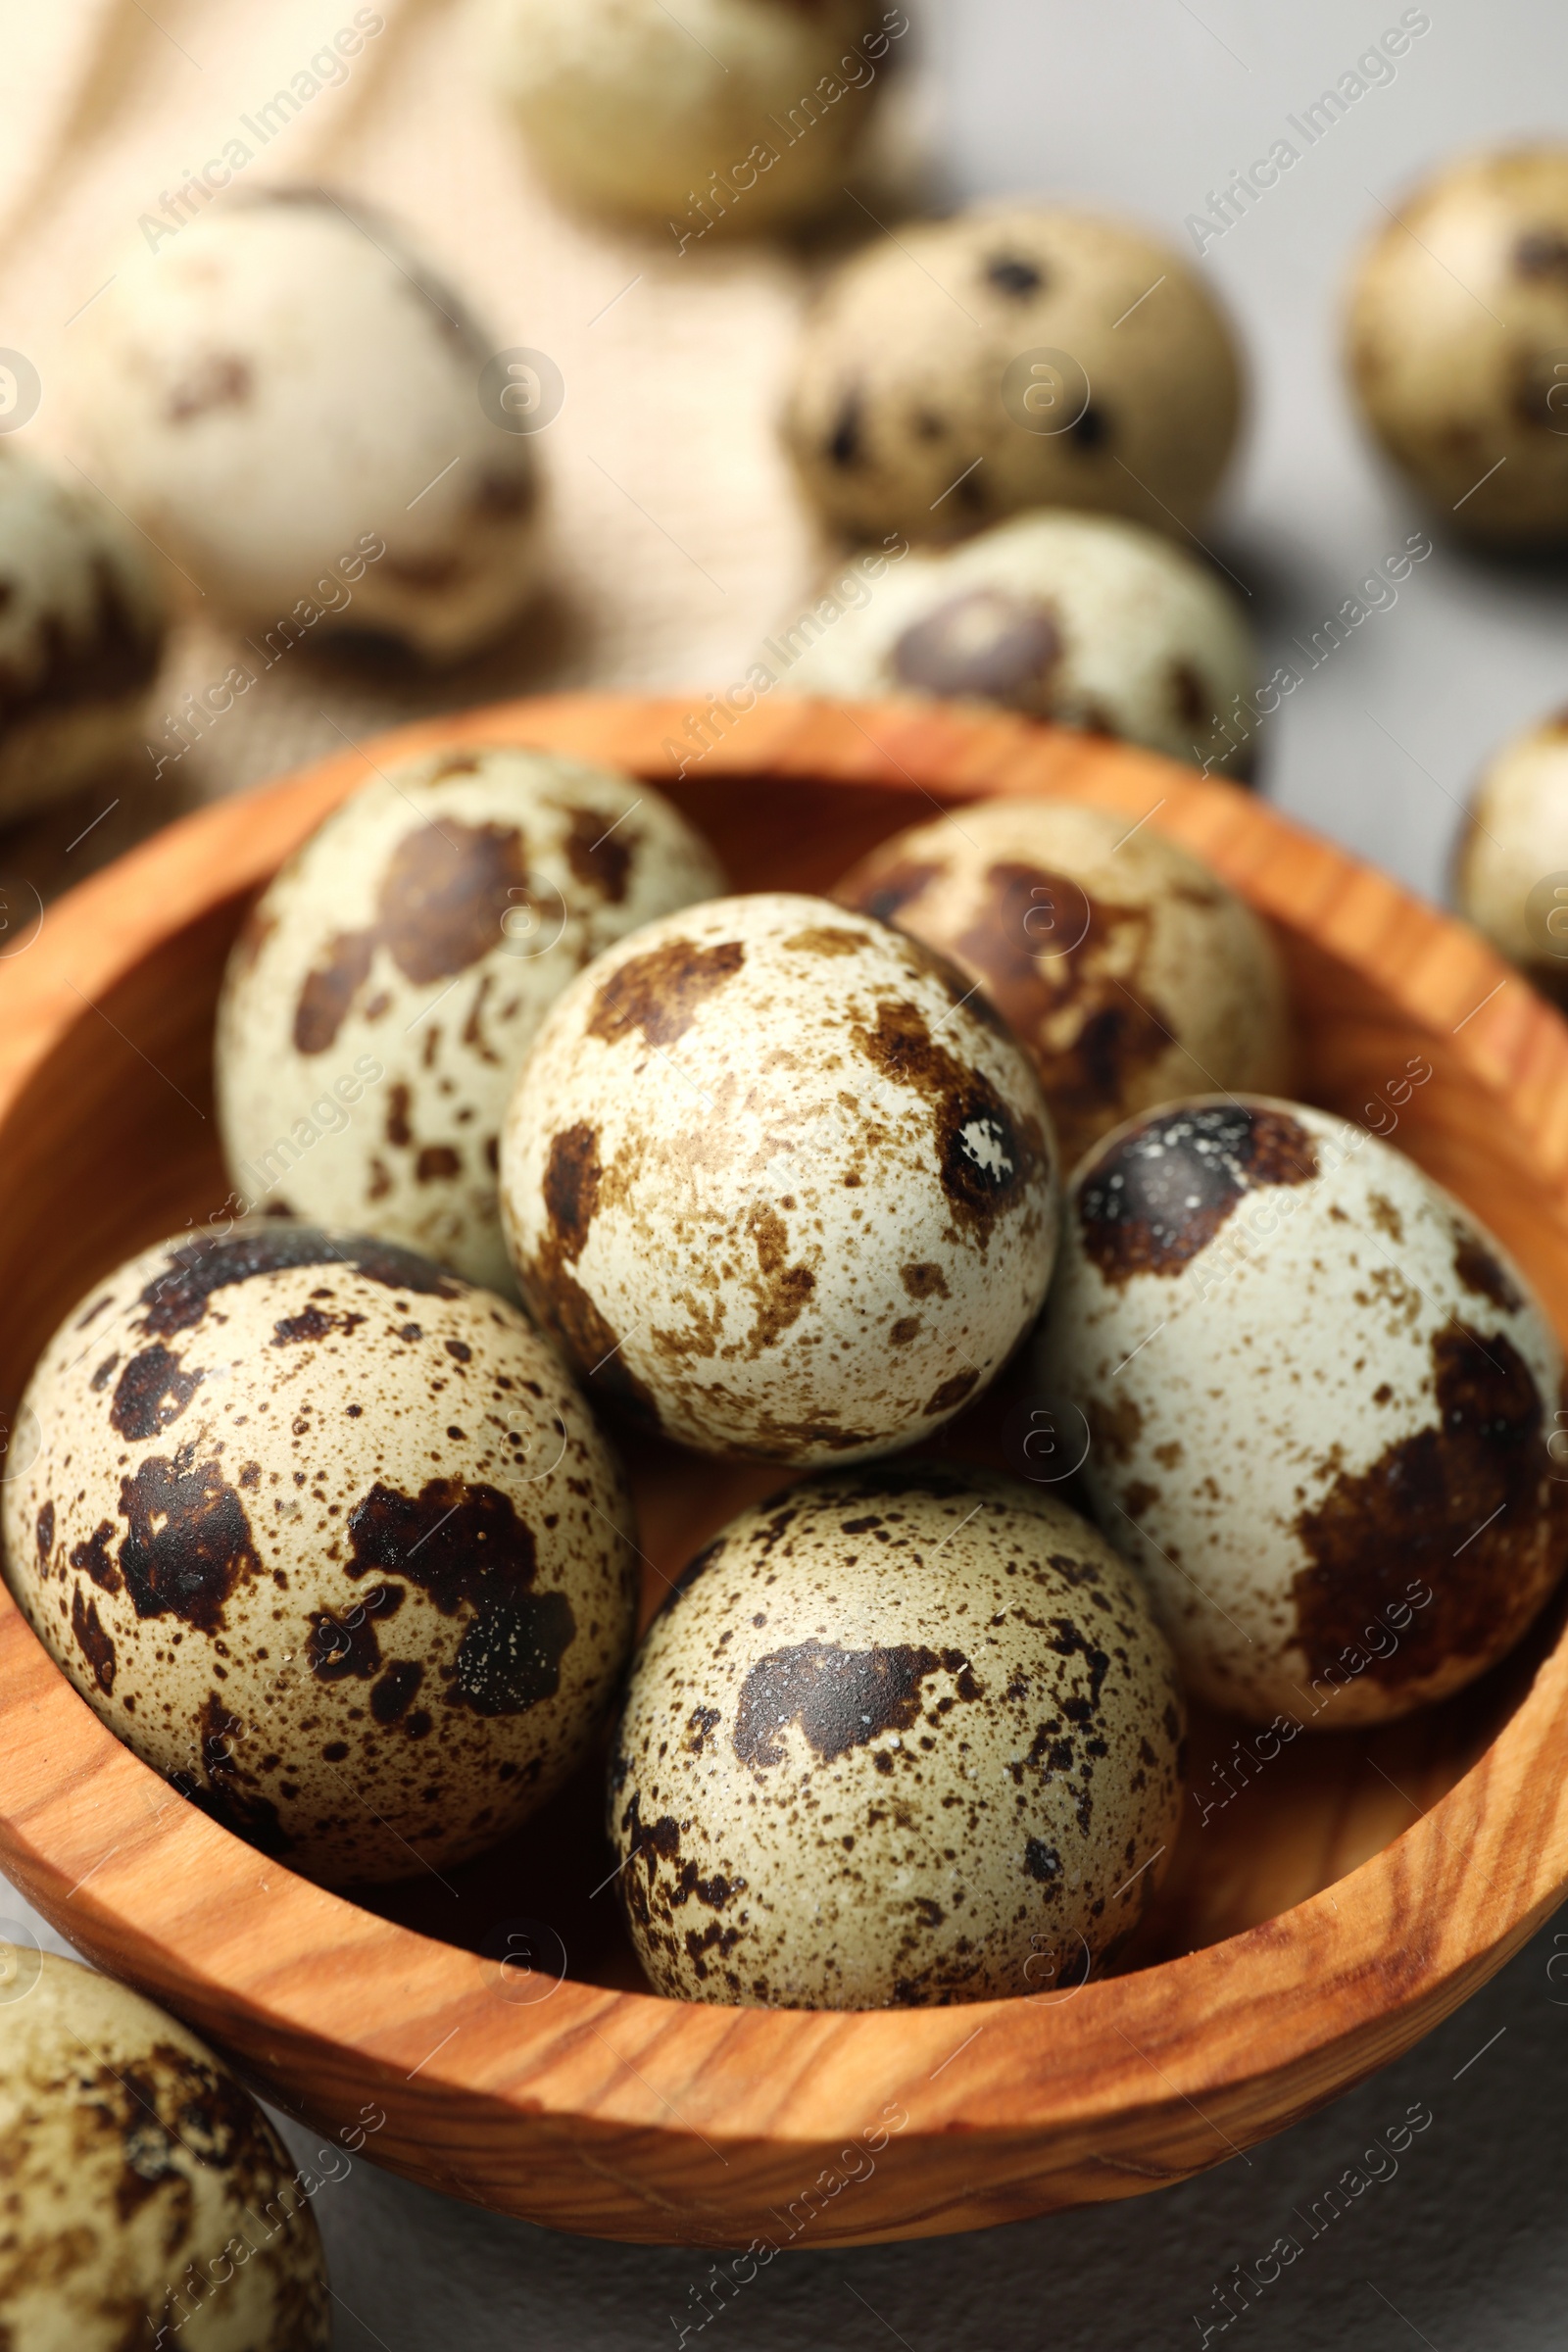 Photo of Wooden bowl and many speckled quail eggs on table, closeup